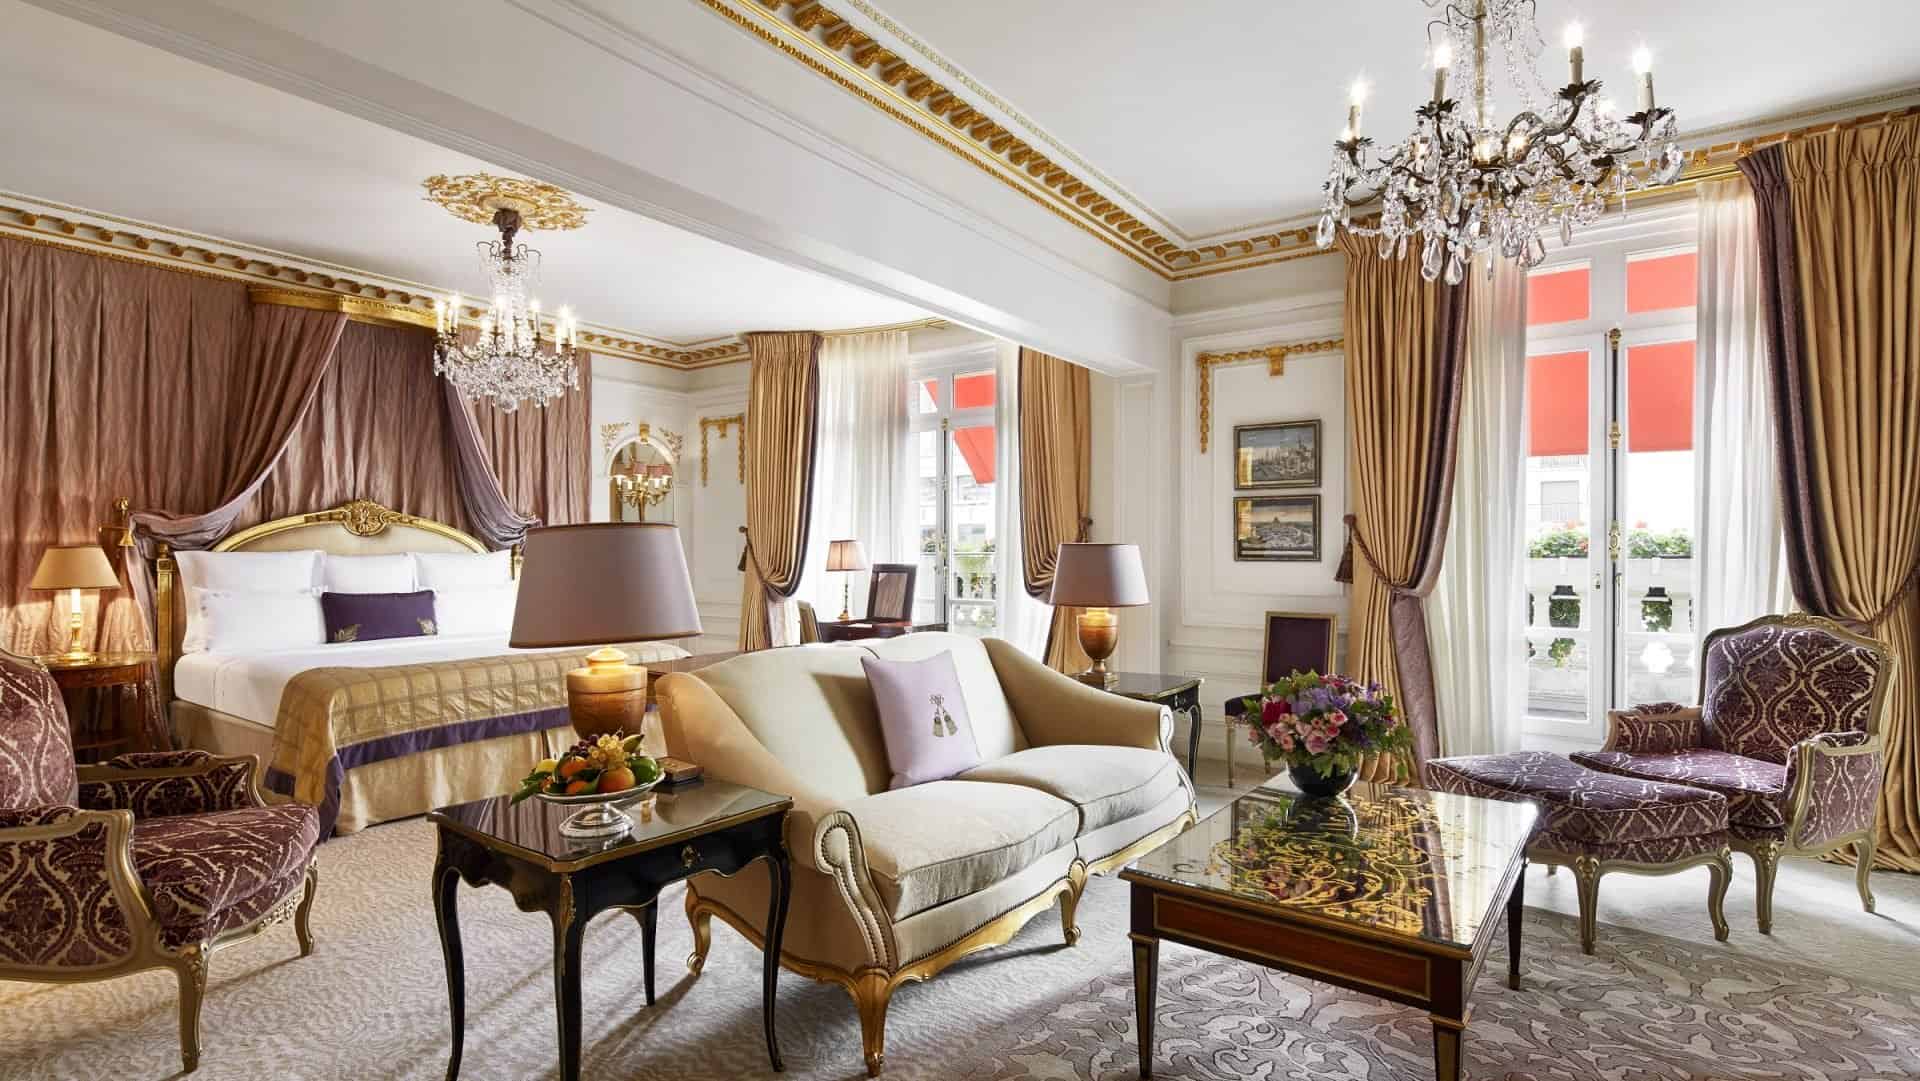 The Royal Suite at Hotel Plaza Athenee Paris Bedroom